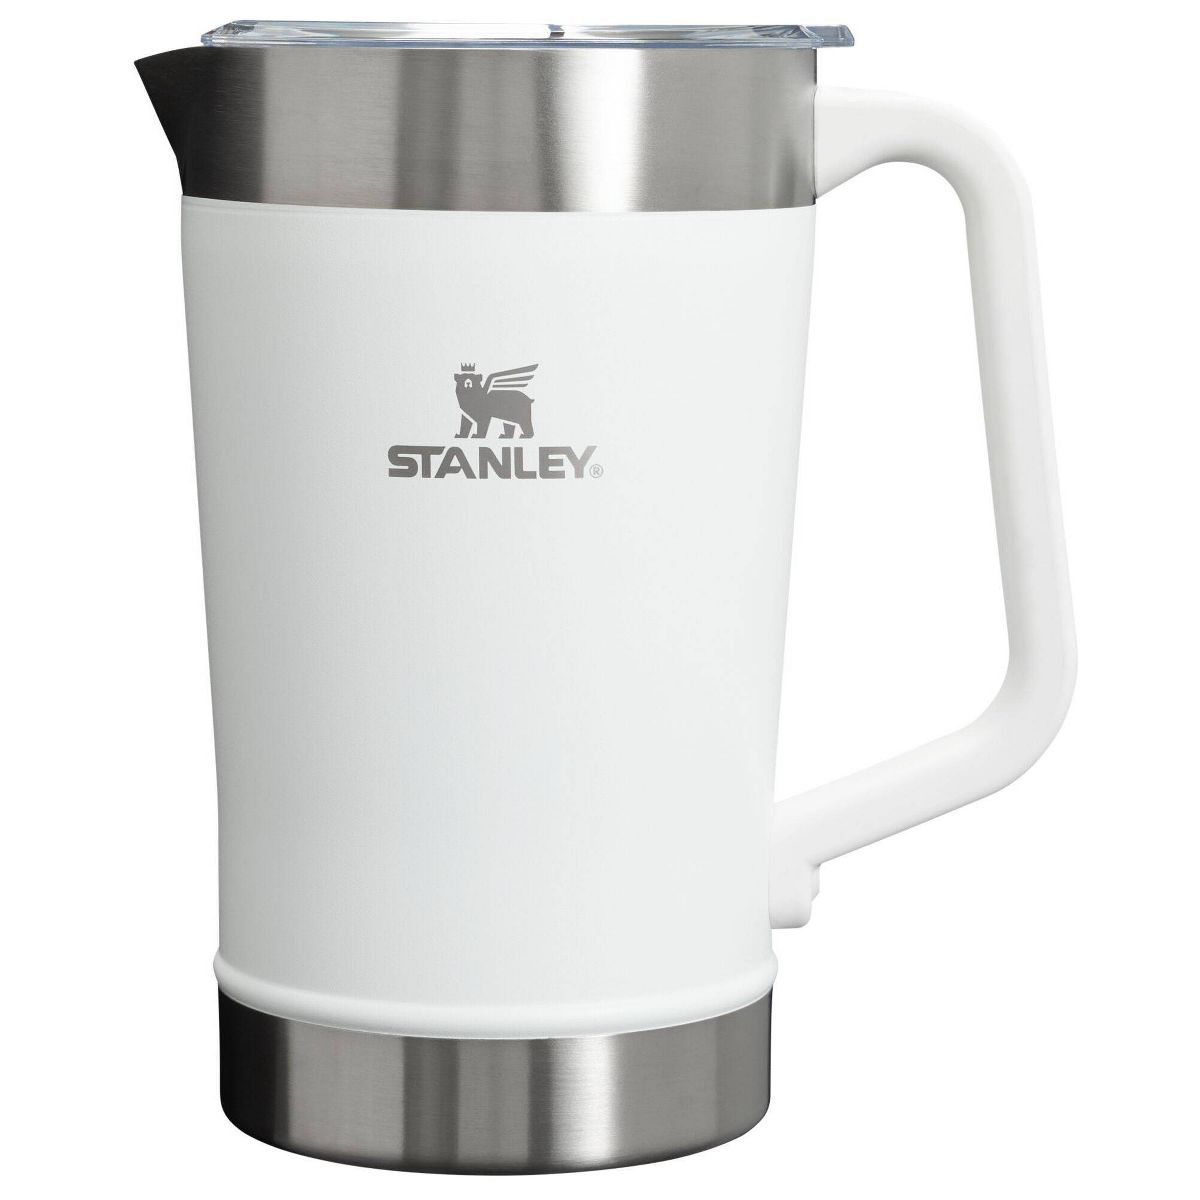 Stanley 64 oz Stainless Steel Stay-Chill Pitcher Frost | Target